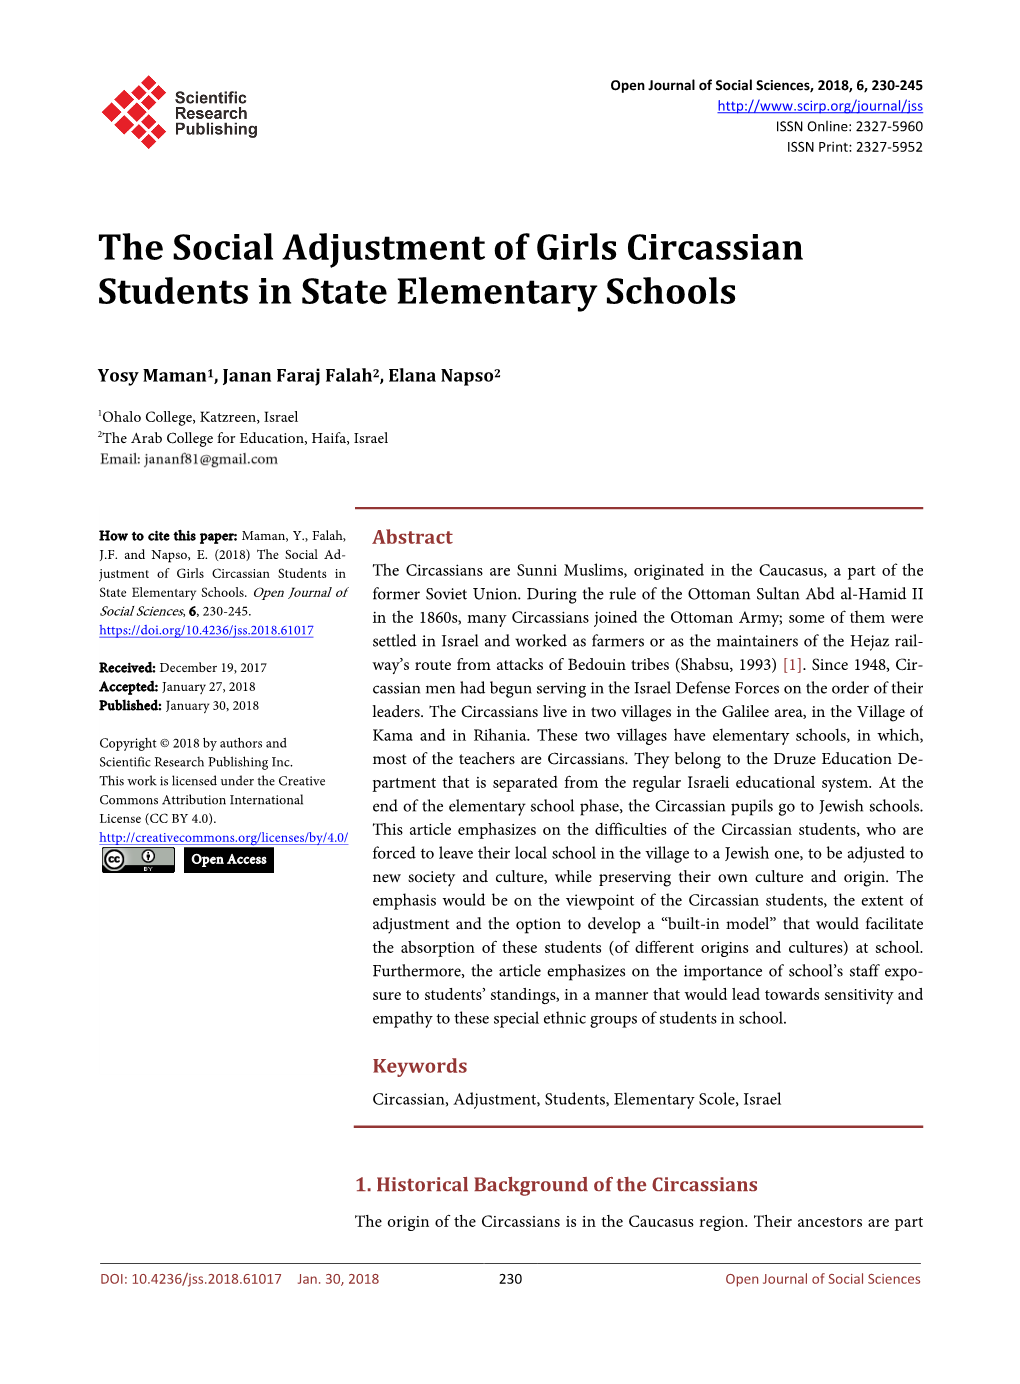 The Social Adjustment of Girls Circassian Students in State Elementary Schools